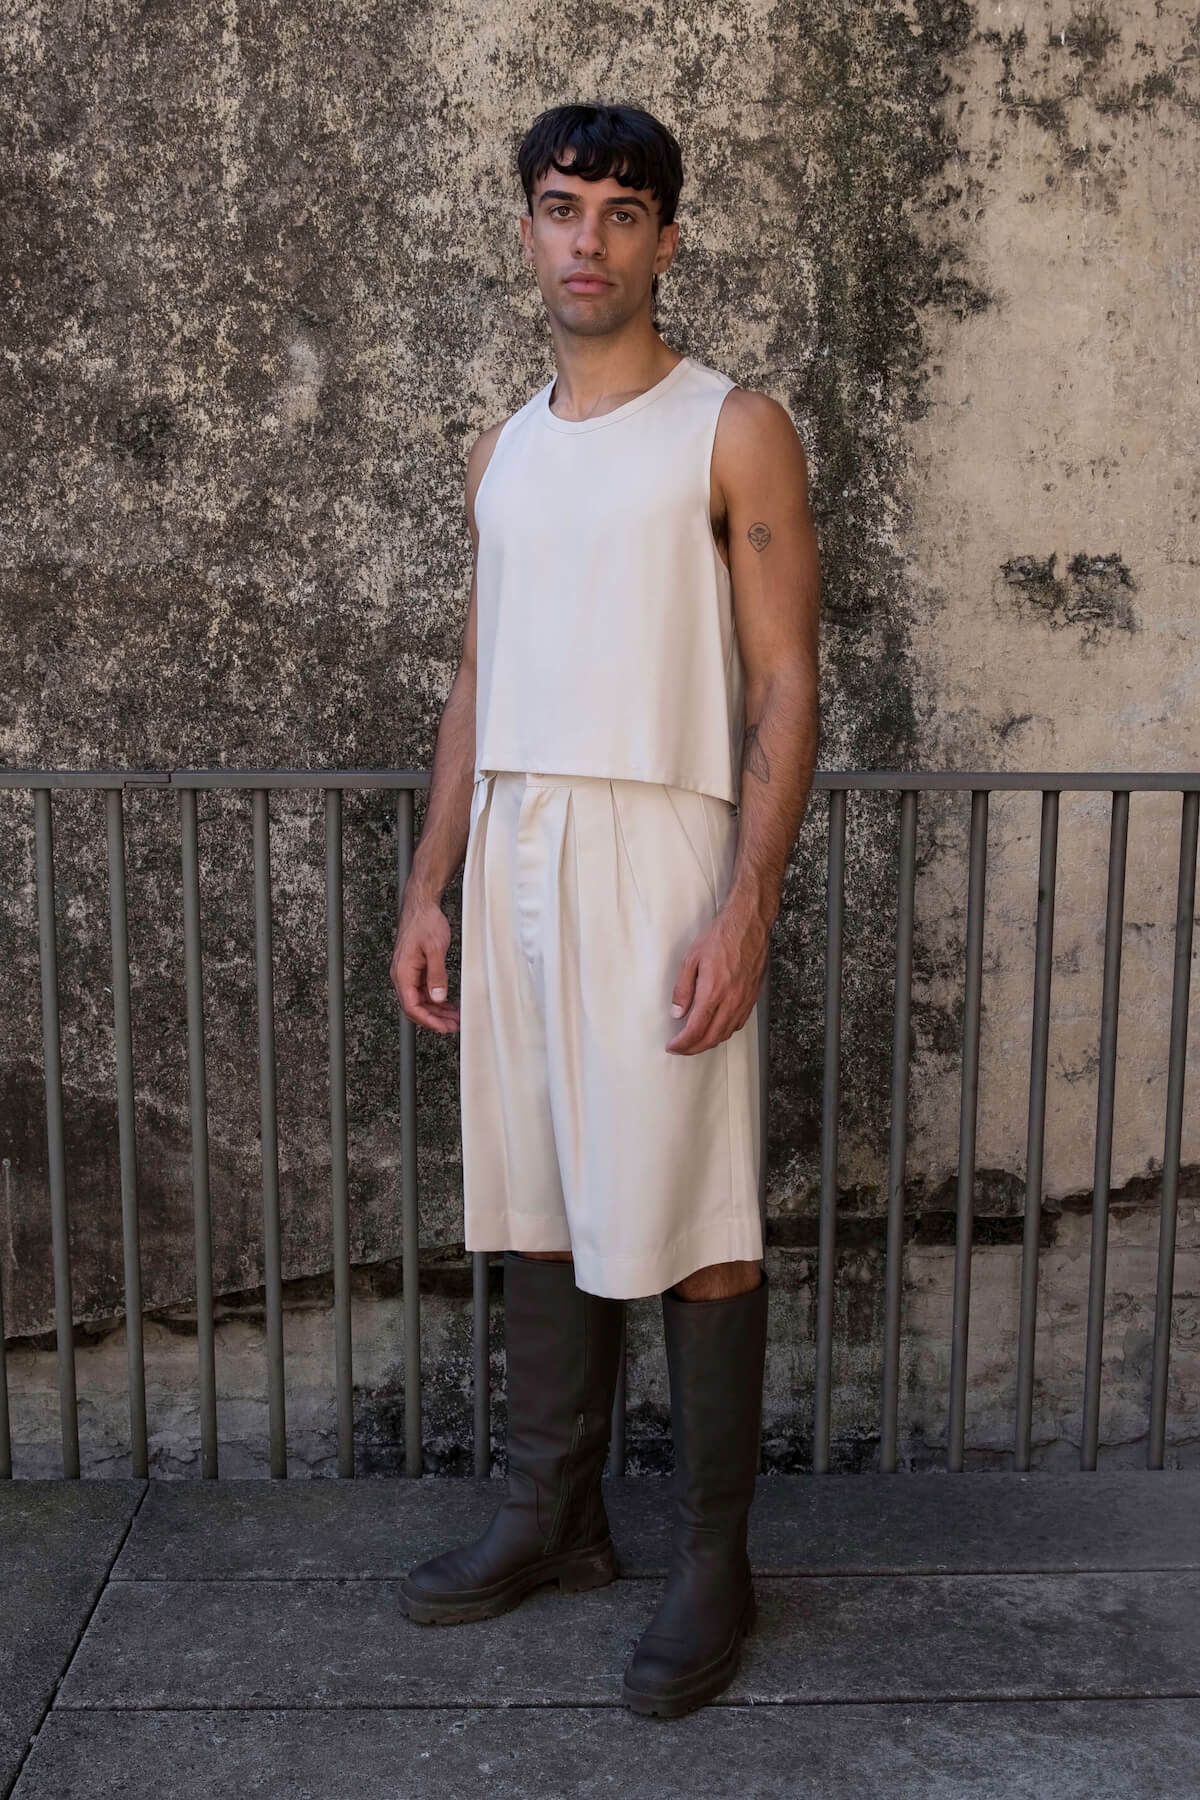 Cropped top for men and men's knee length shorts in mushroom